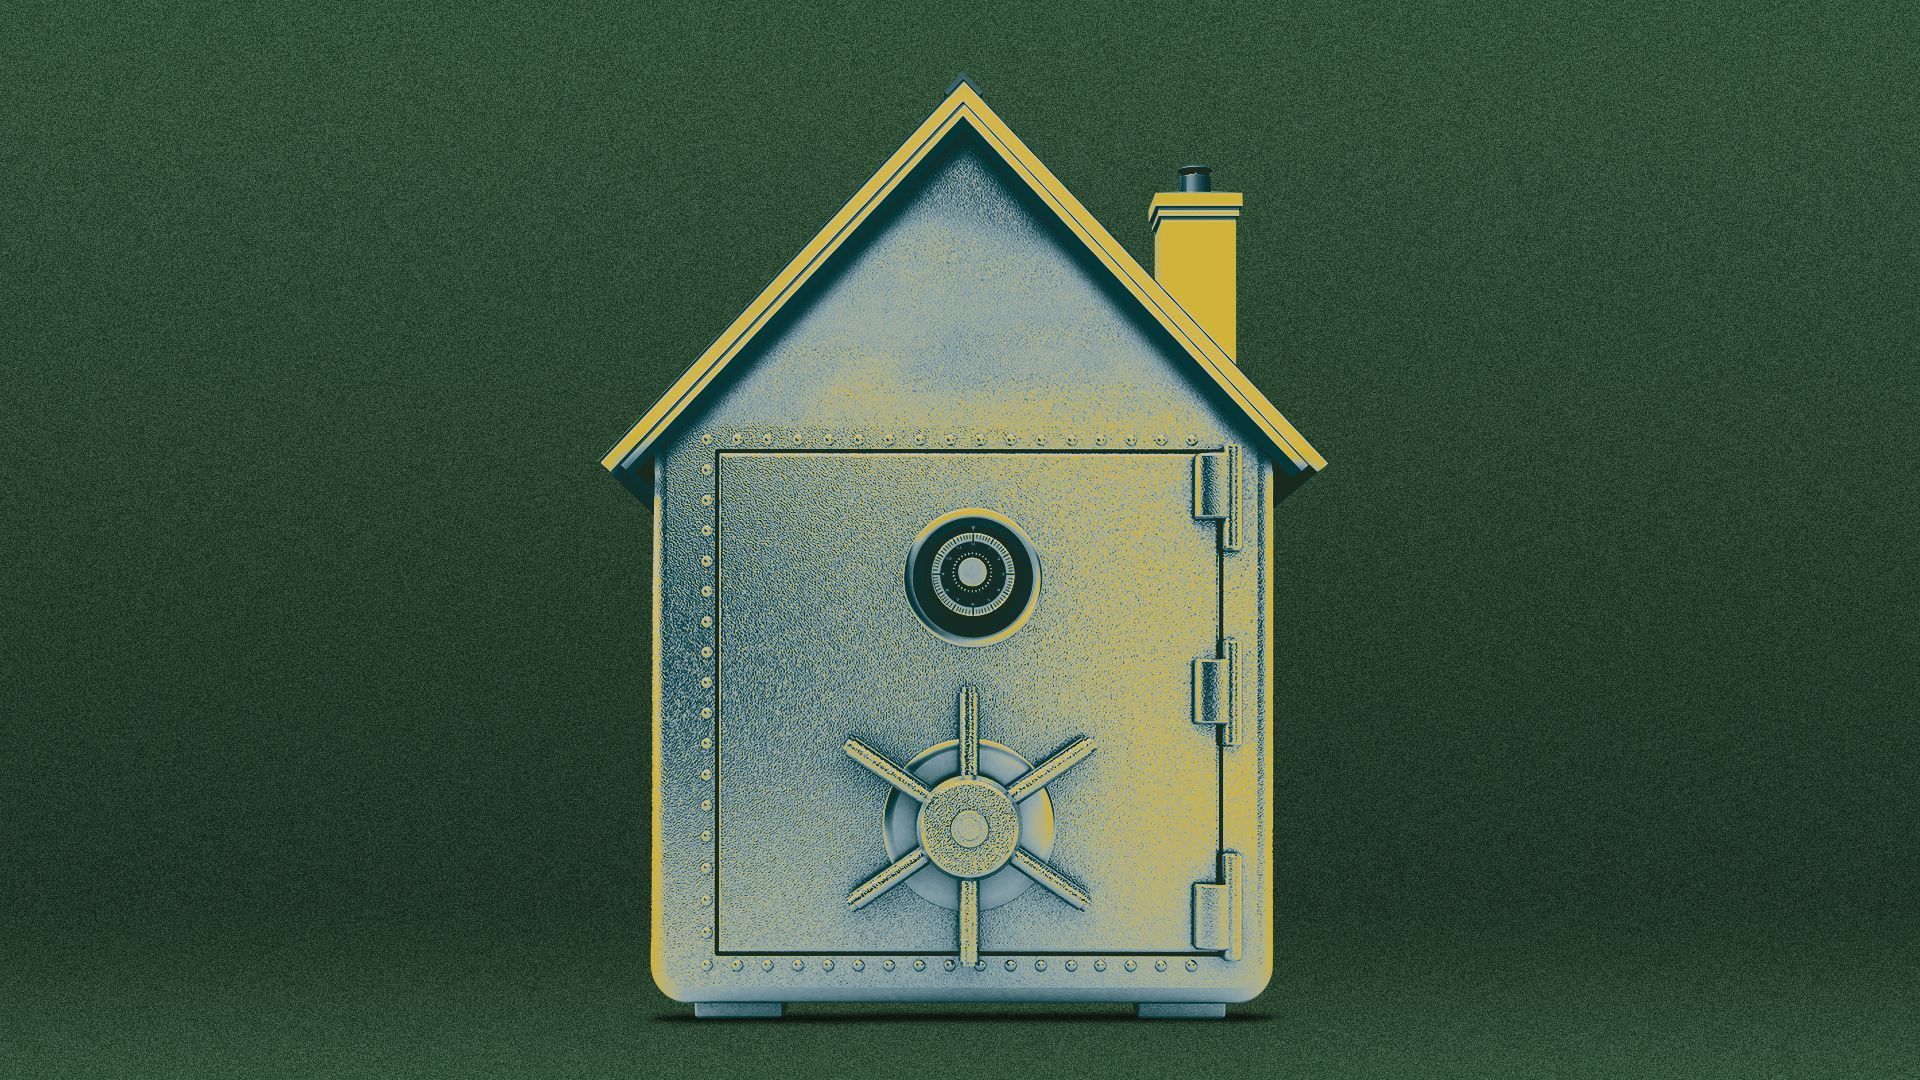 Illustration of a safe with a roof like a house.